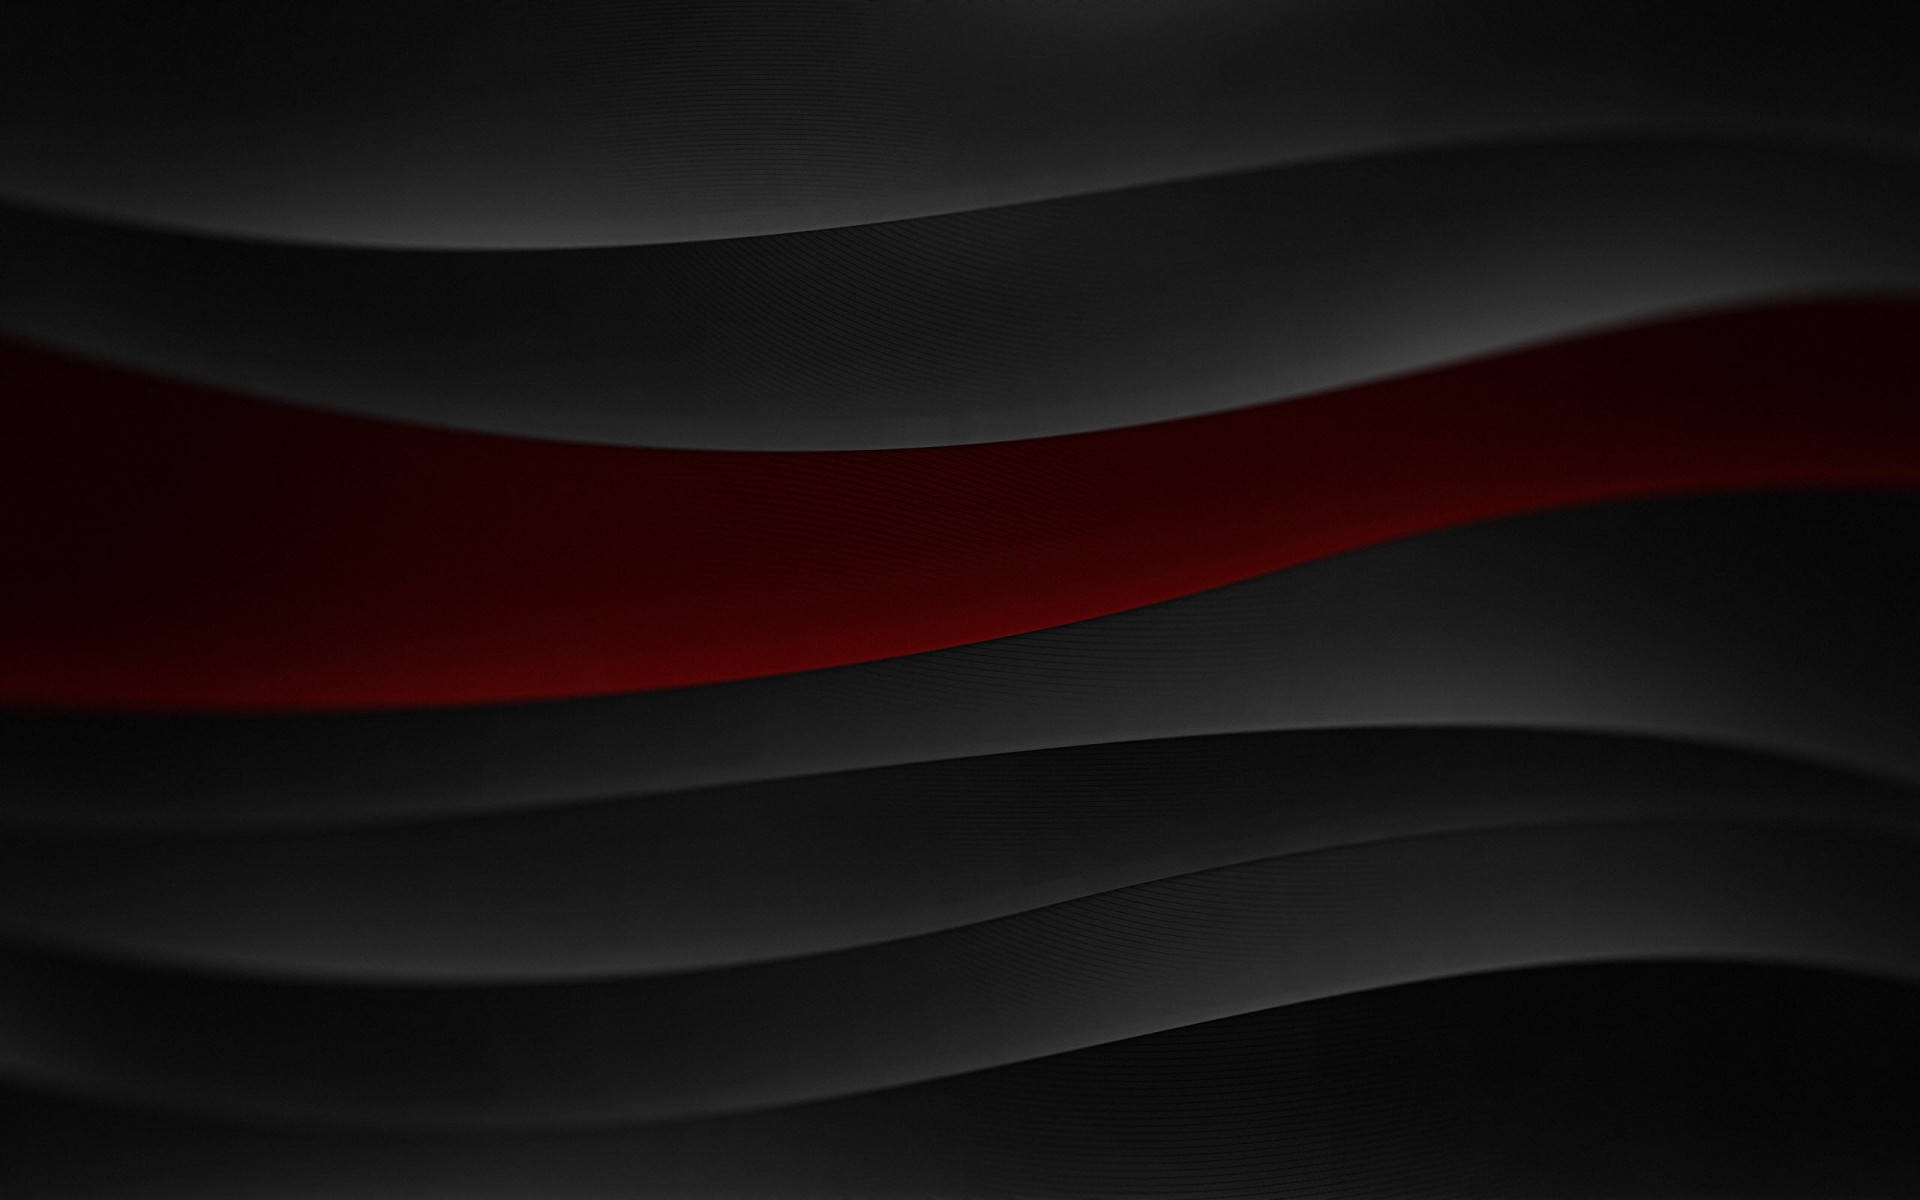 A Black And Red Abstract Wallpaper With Wavy Lines Background